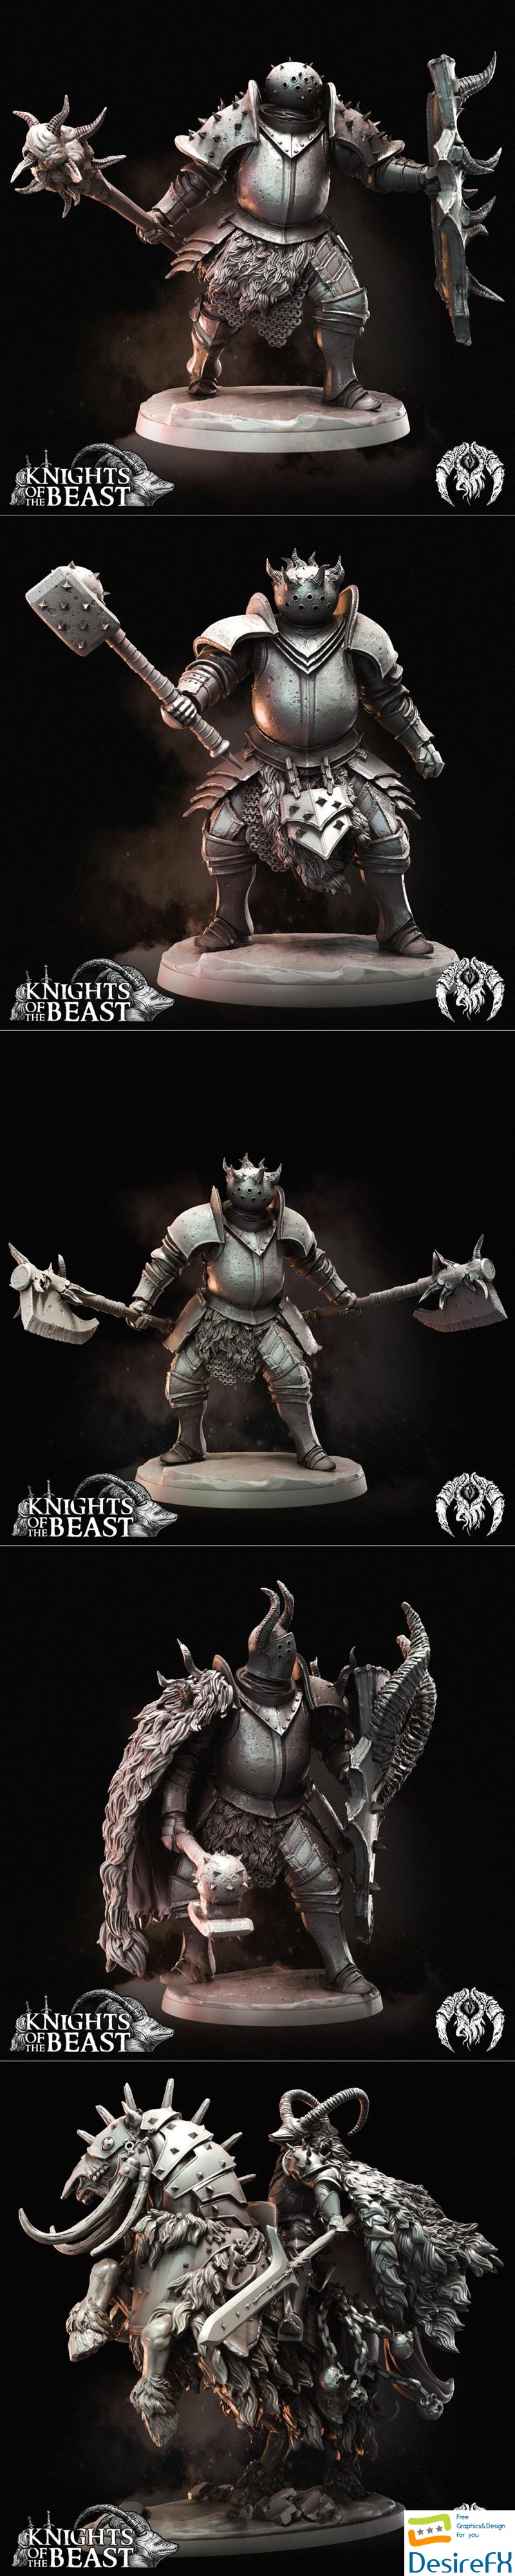 Bestiarum Miniatures - Knights of the Beast Collection 3D Print